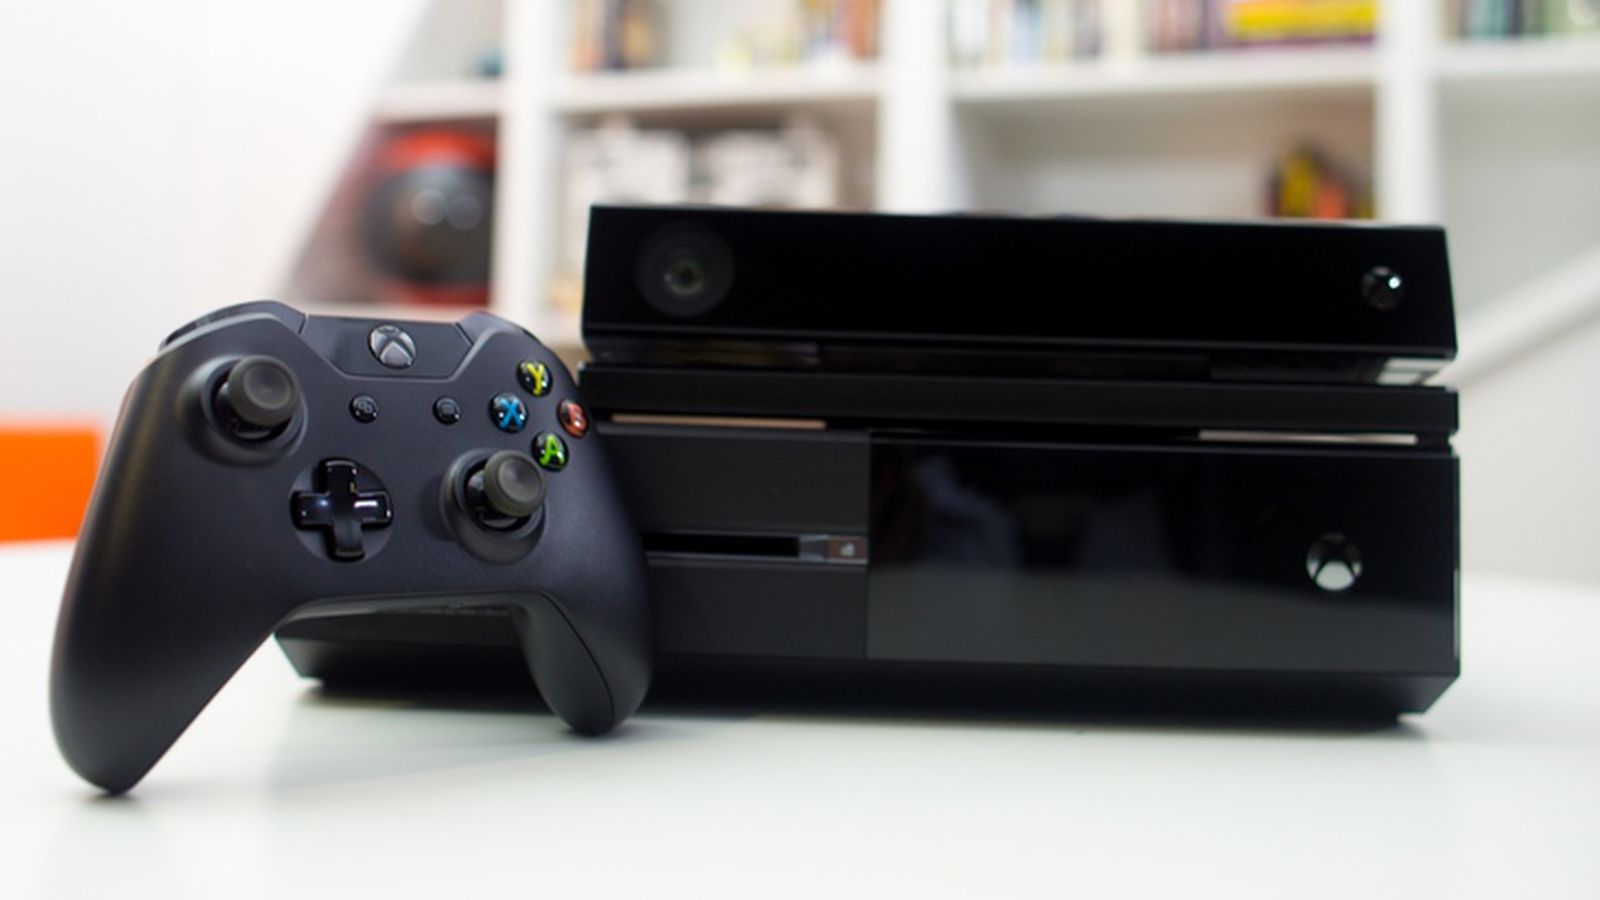 Xbox One systems $50 off at Walmart, Best Buy (update) - Polygon
